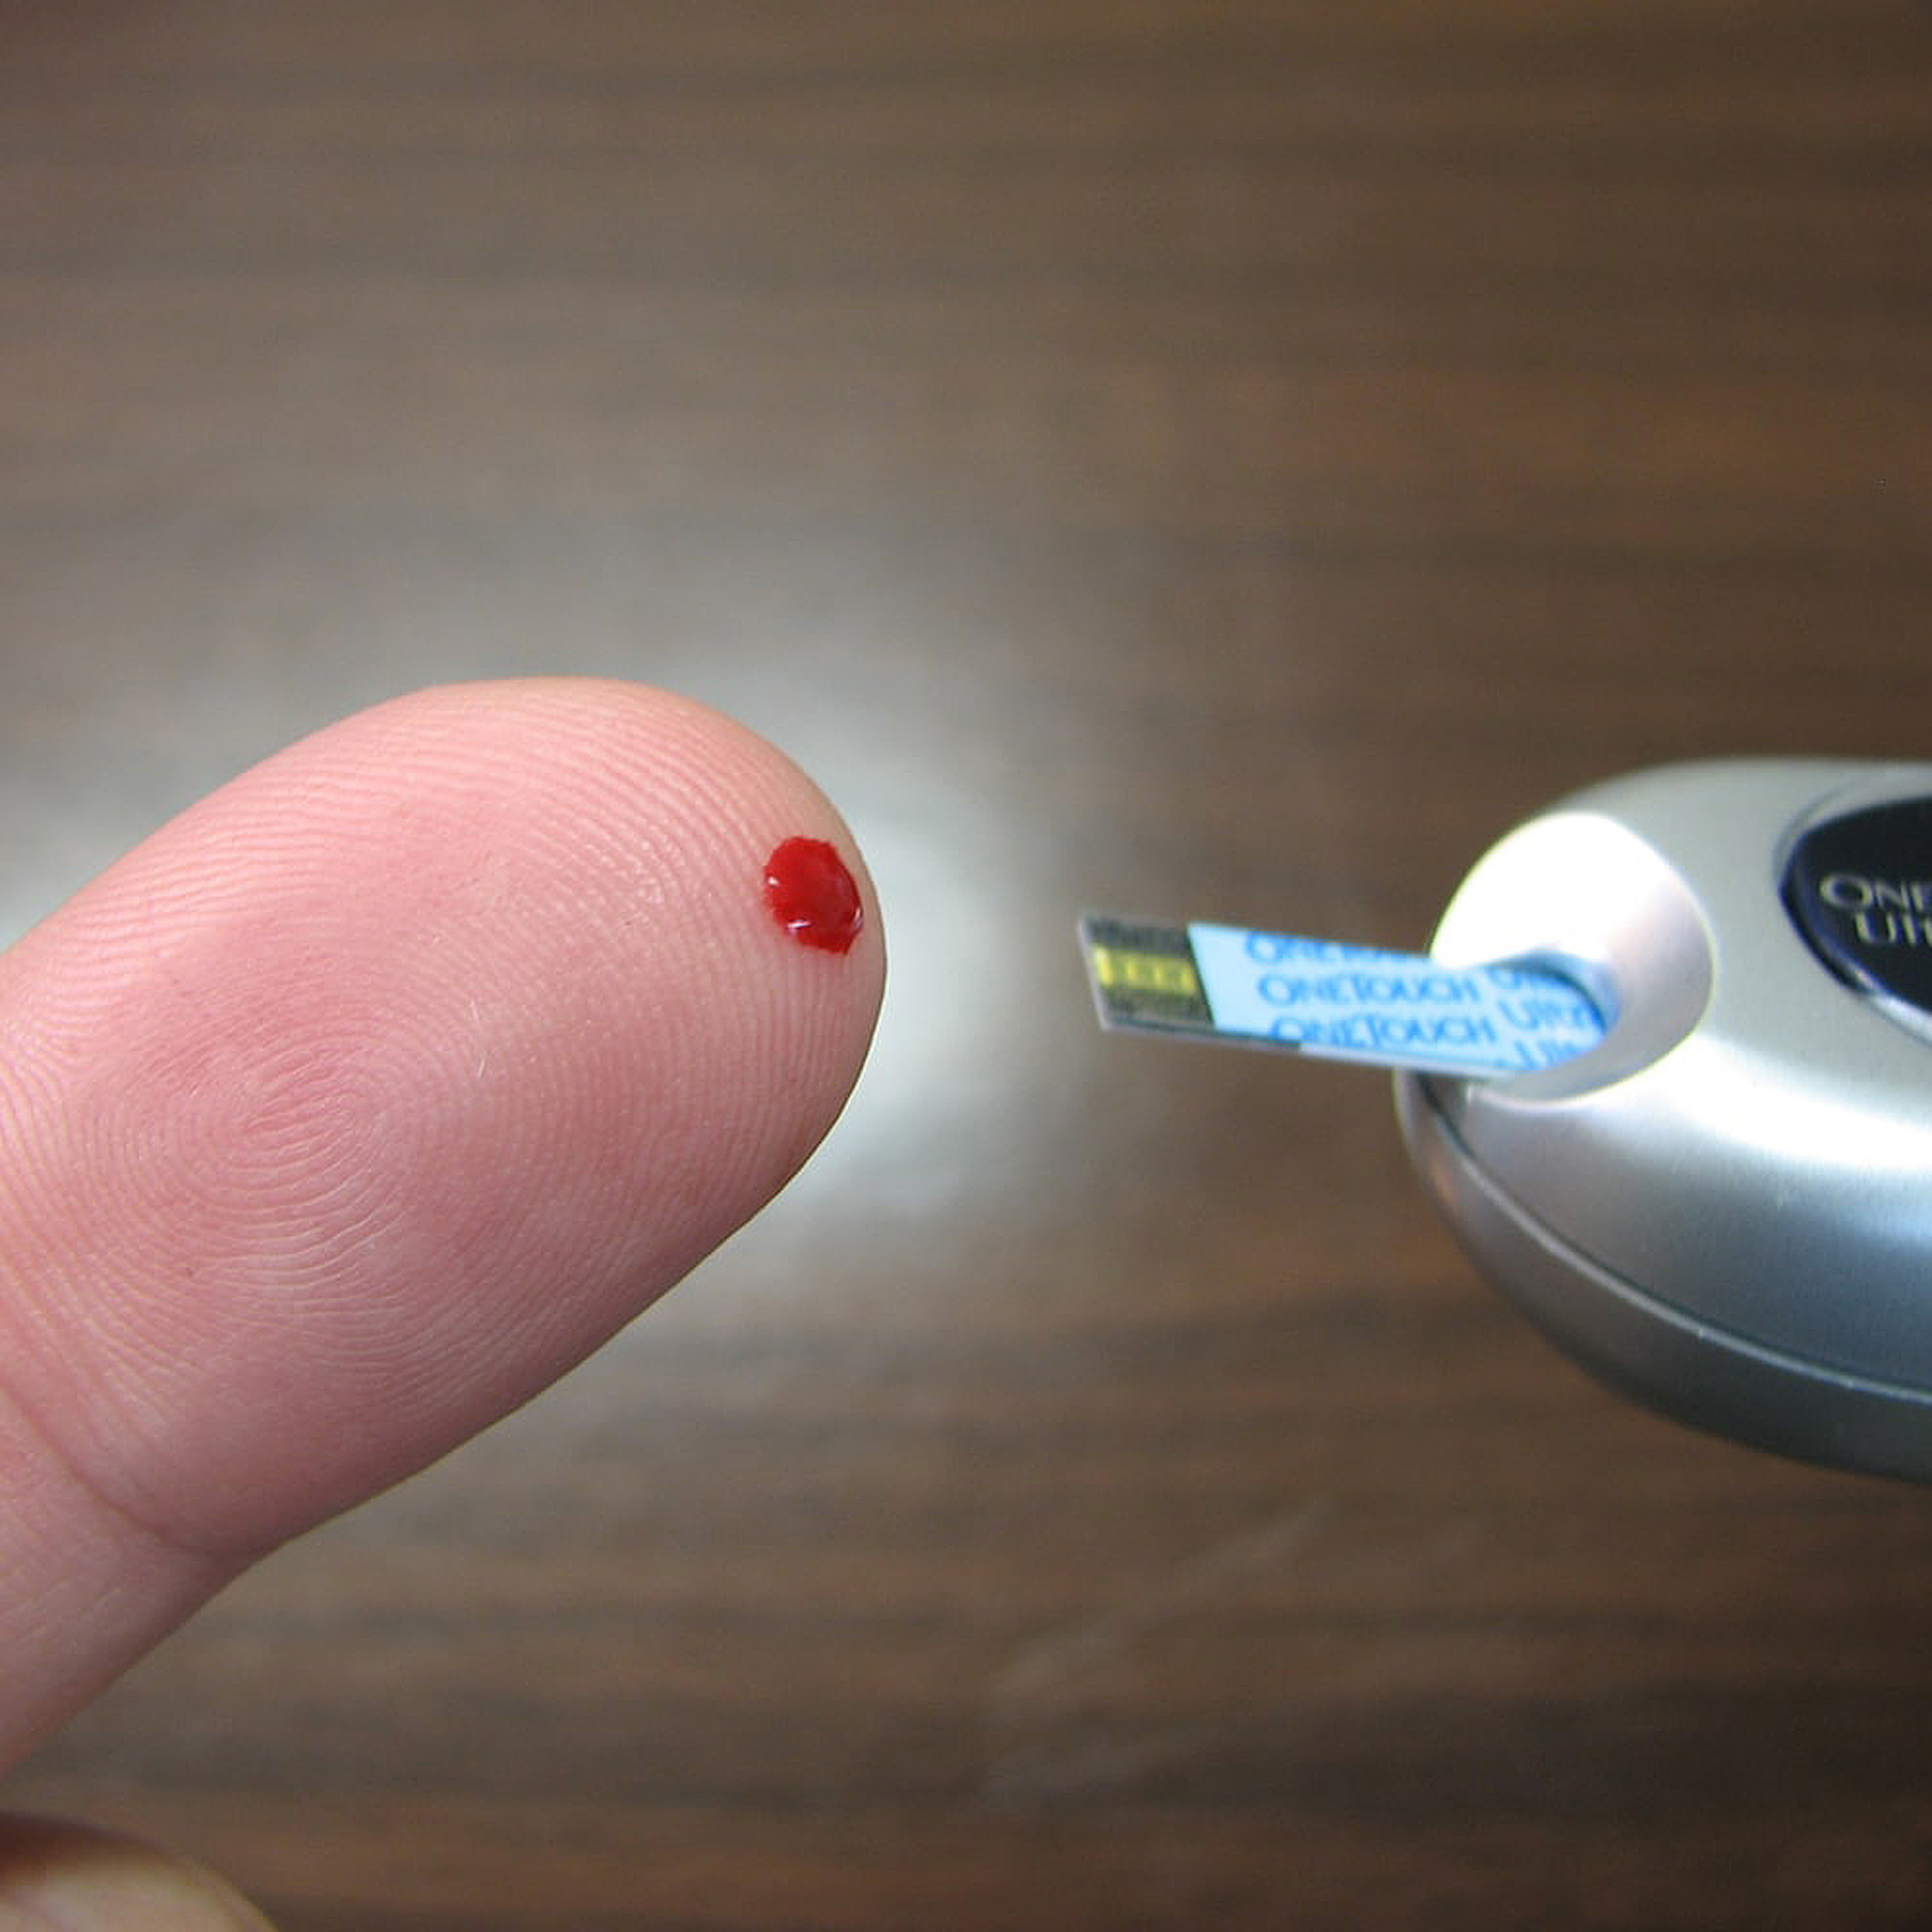 Why blood glucose monitoring?